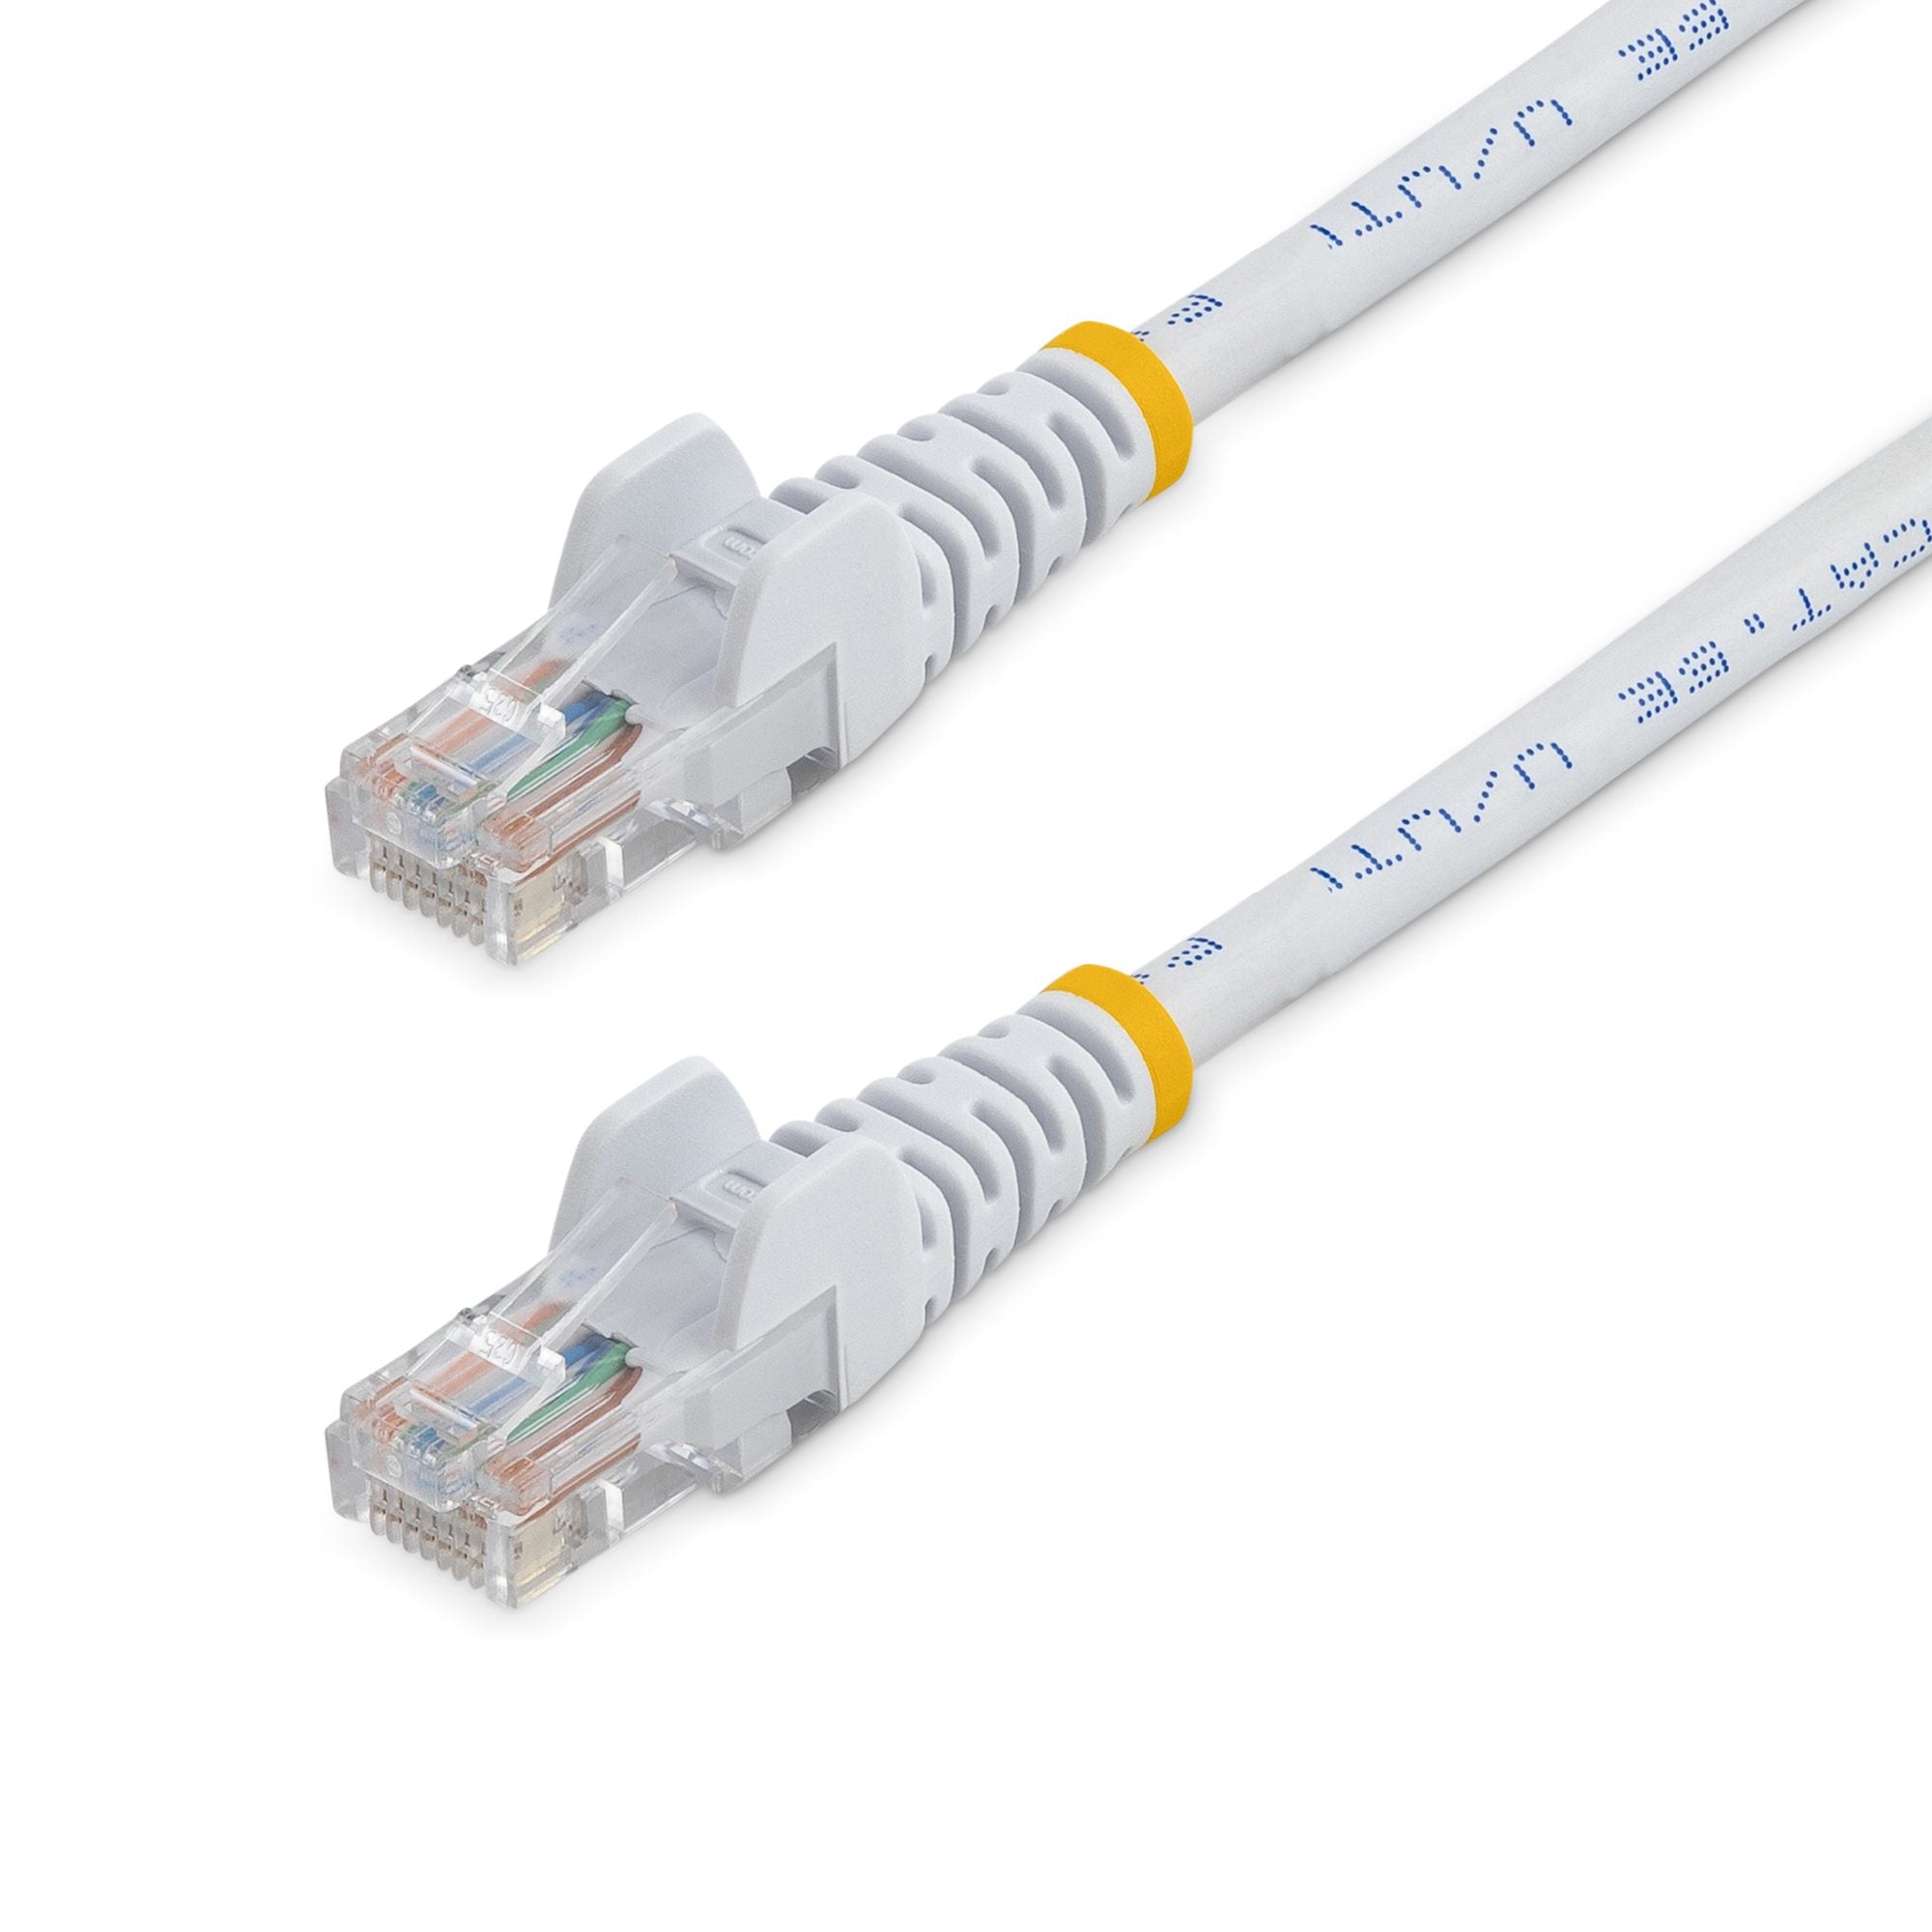 Cat5e Ethernet Patch Cable with Snagless RJ45 Connectors - 10 m